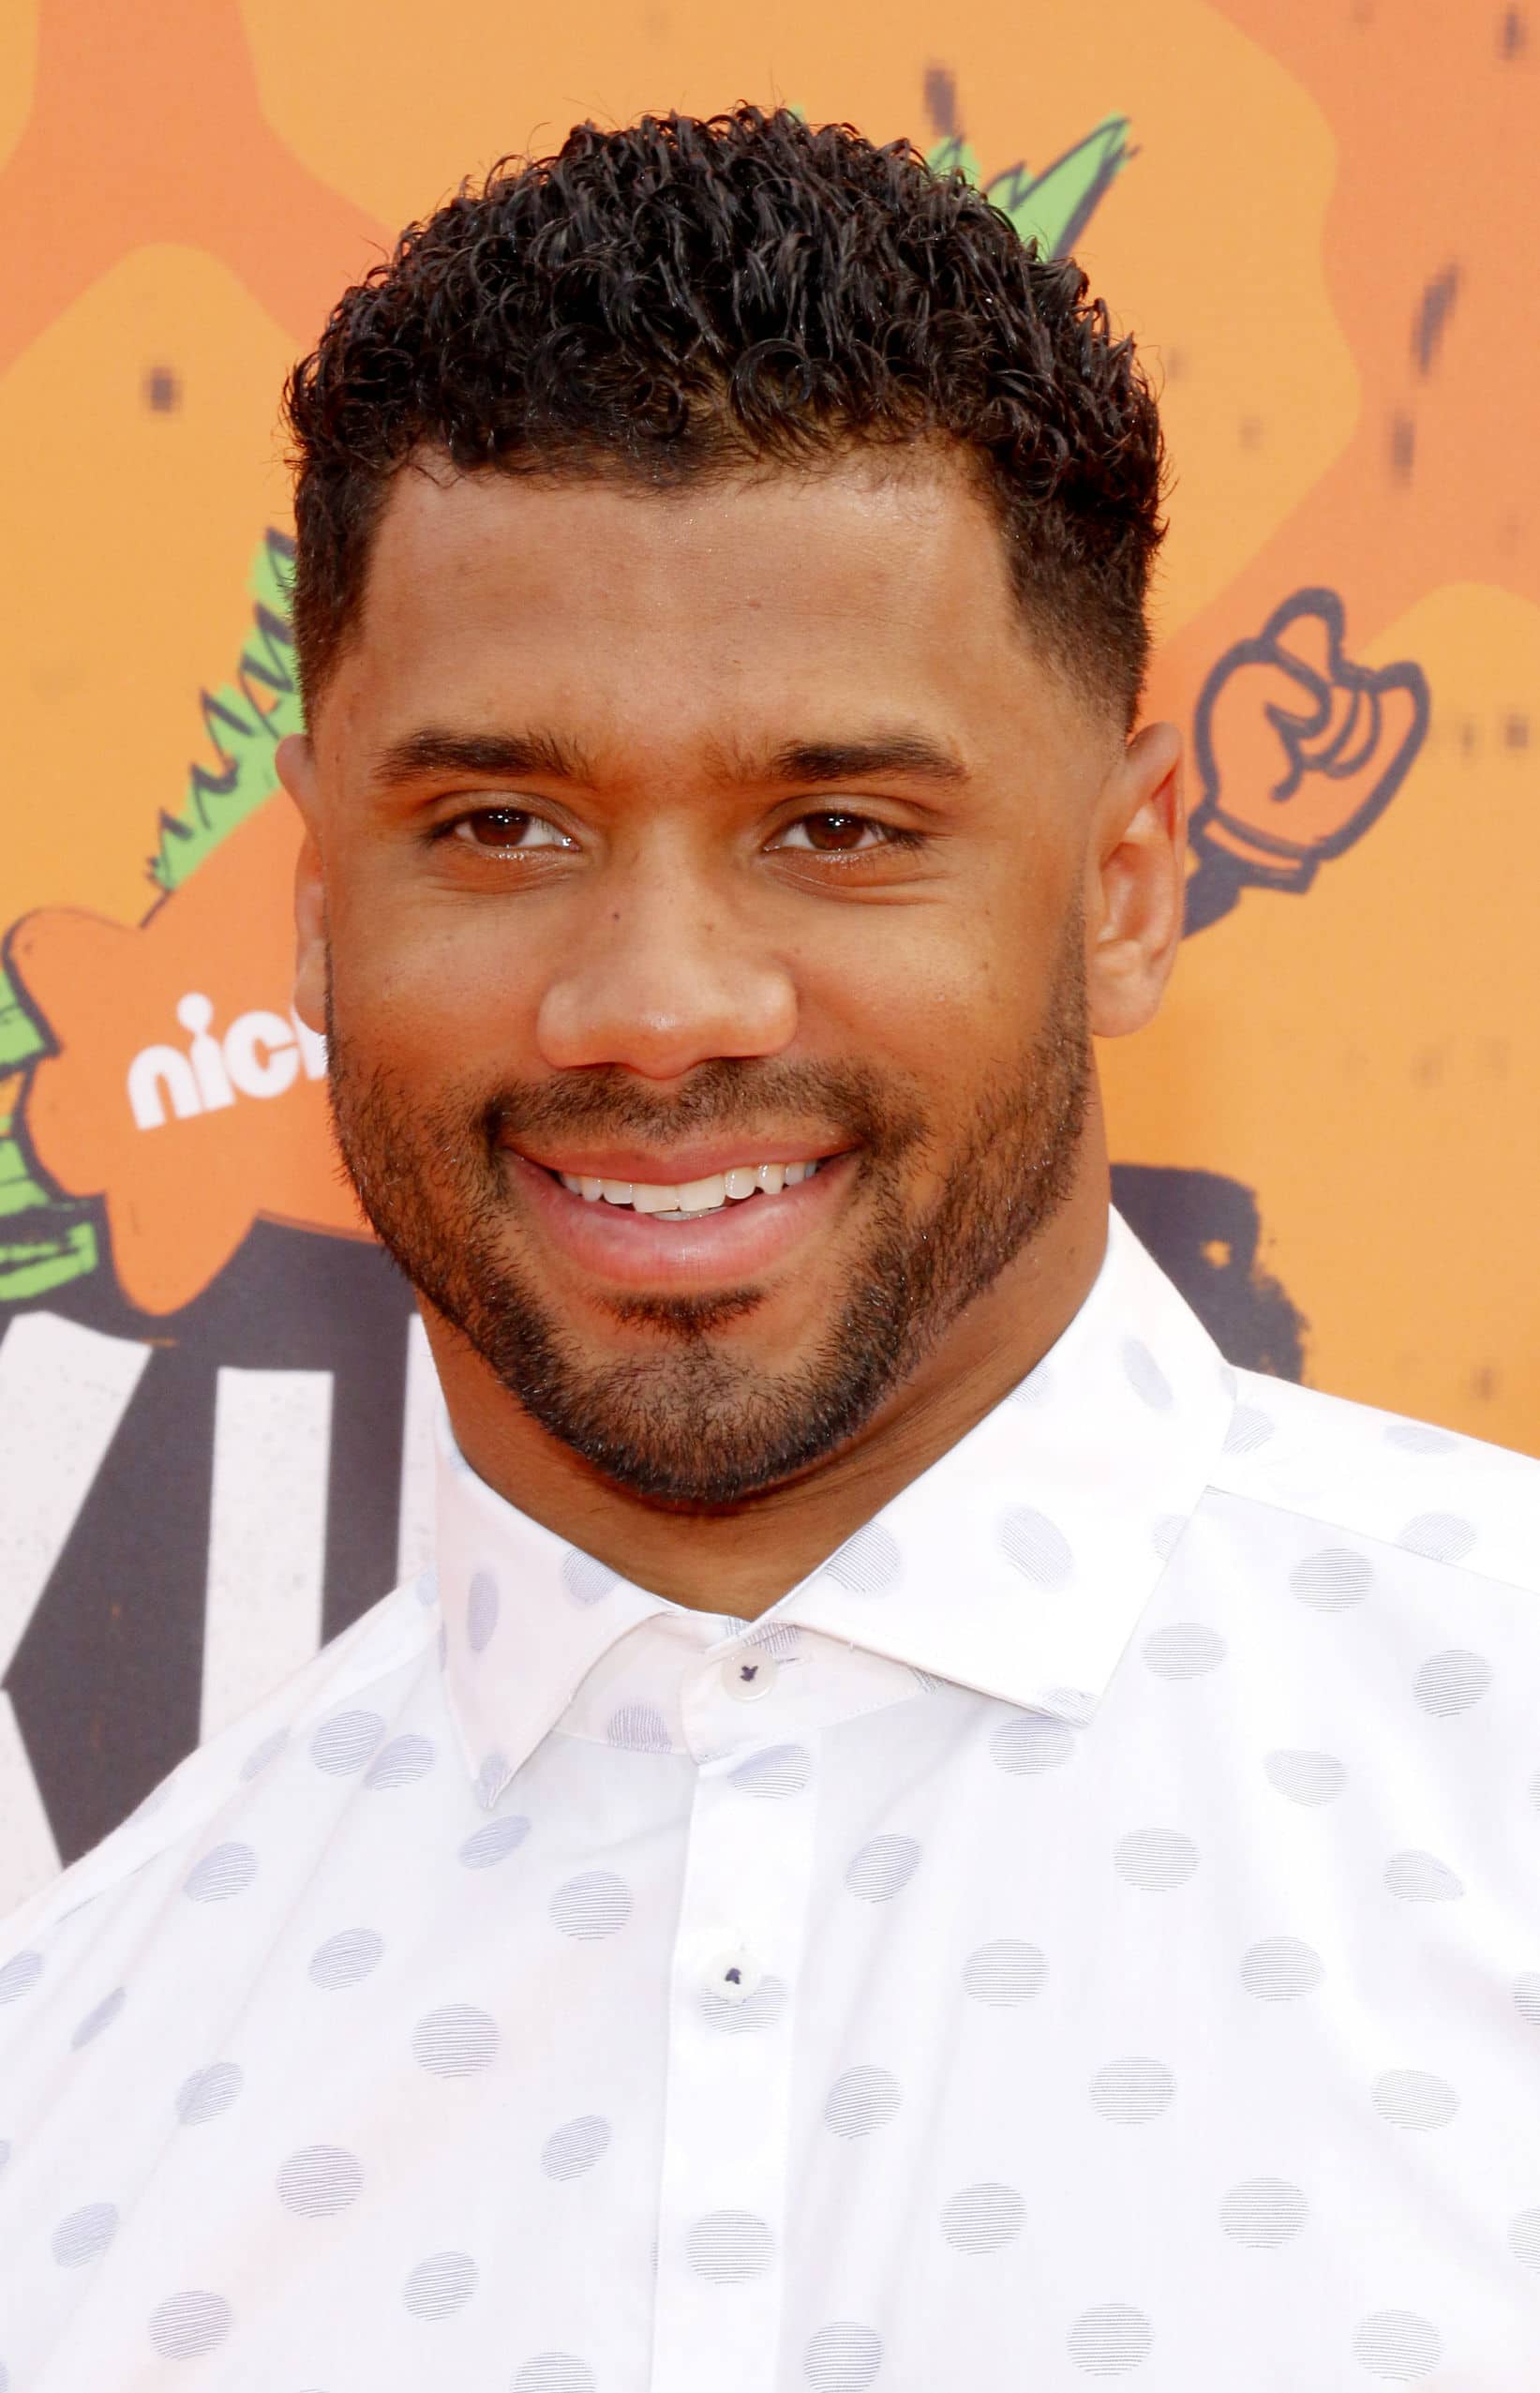 How to be Successful in PR Like Russell Wilson